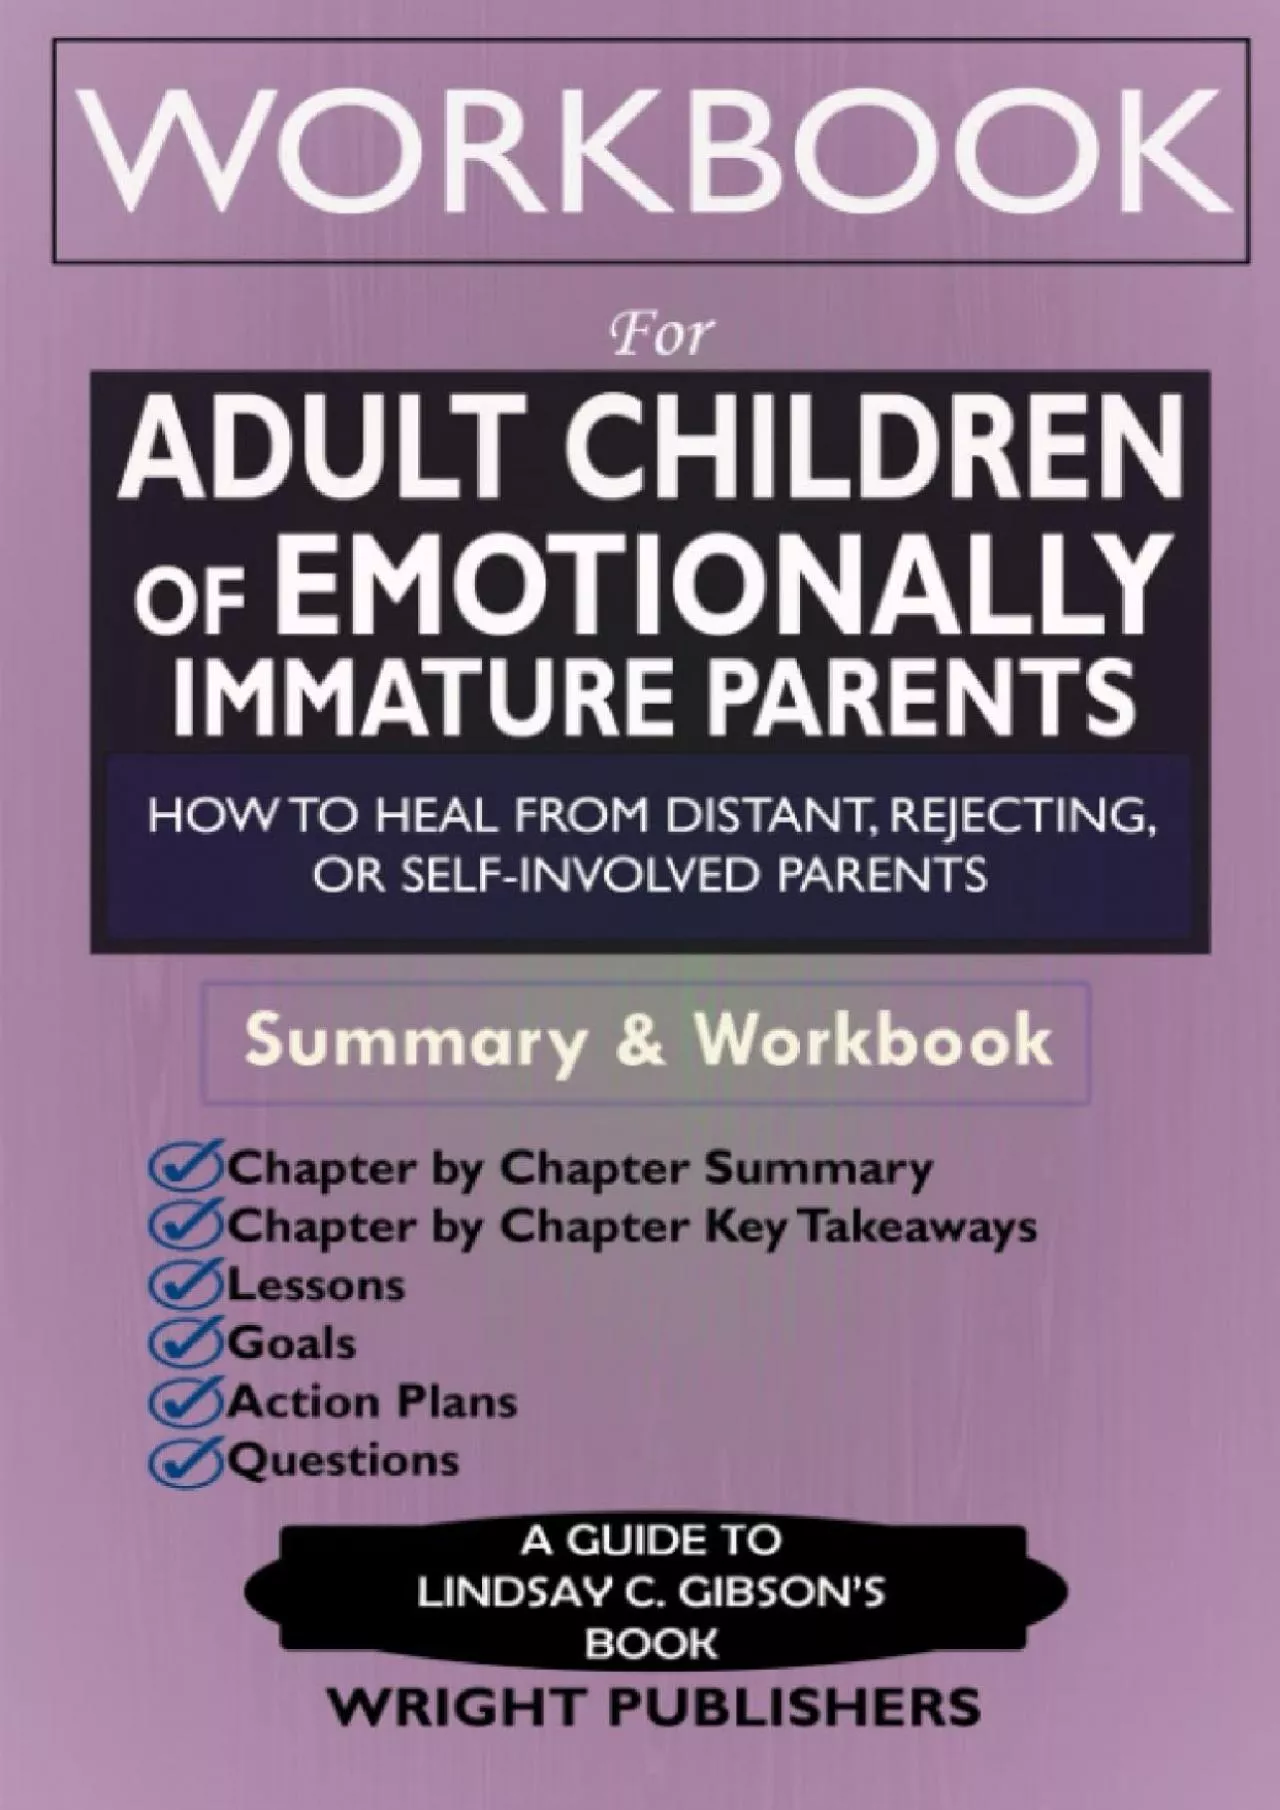 [EBOOK] Workbook for Adult Children of Emotionally Immature Parents: How to Heal from